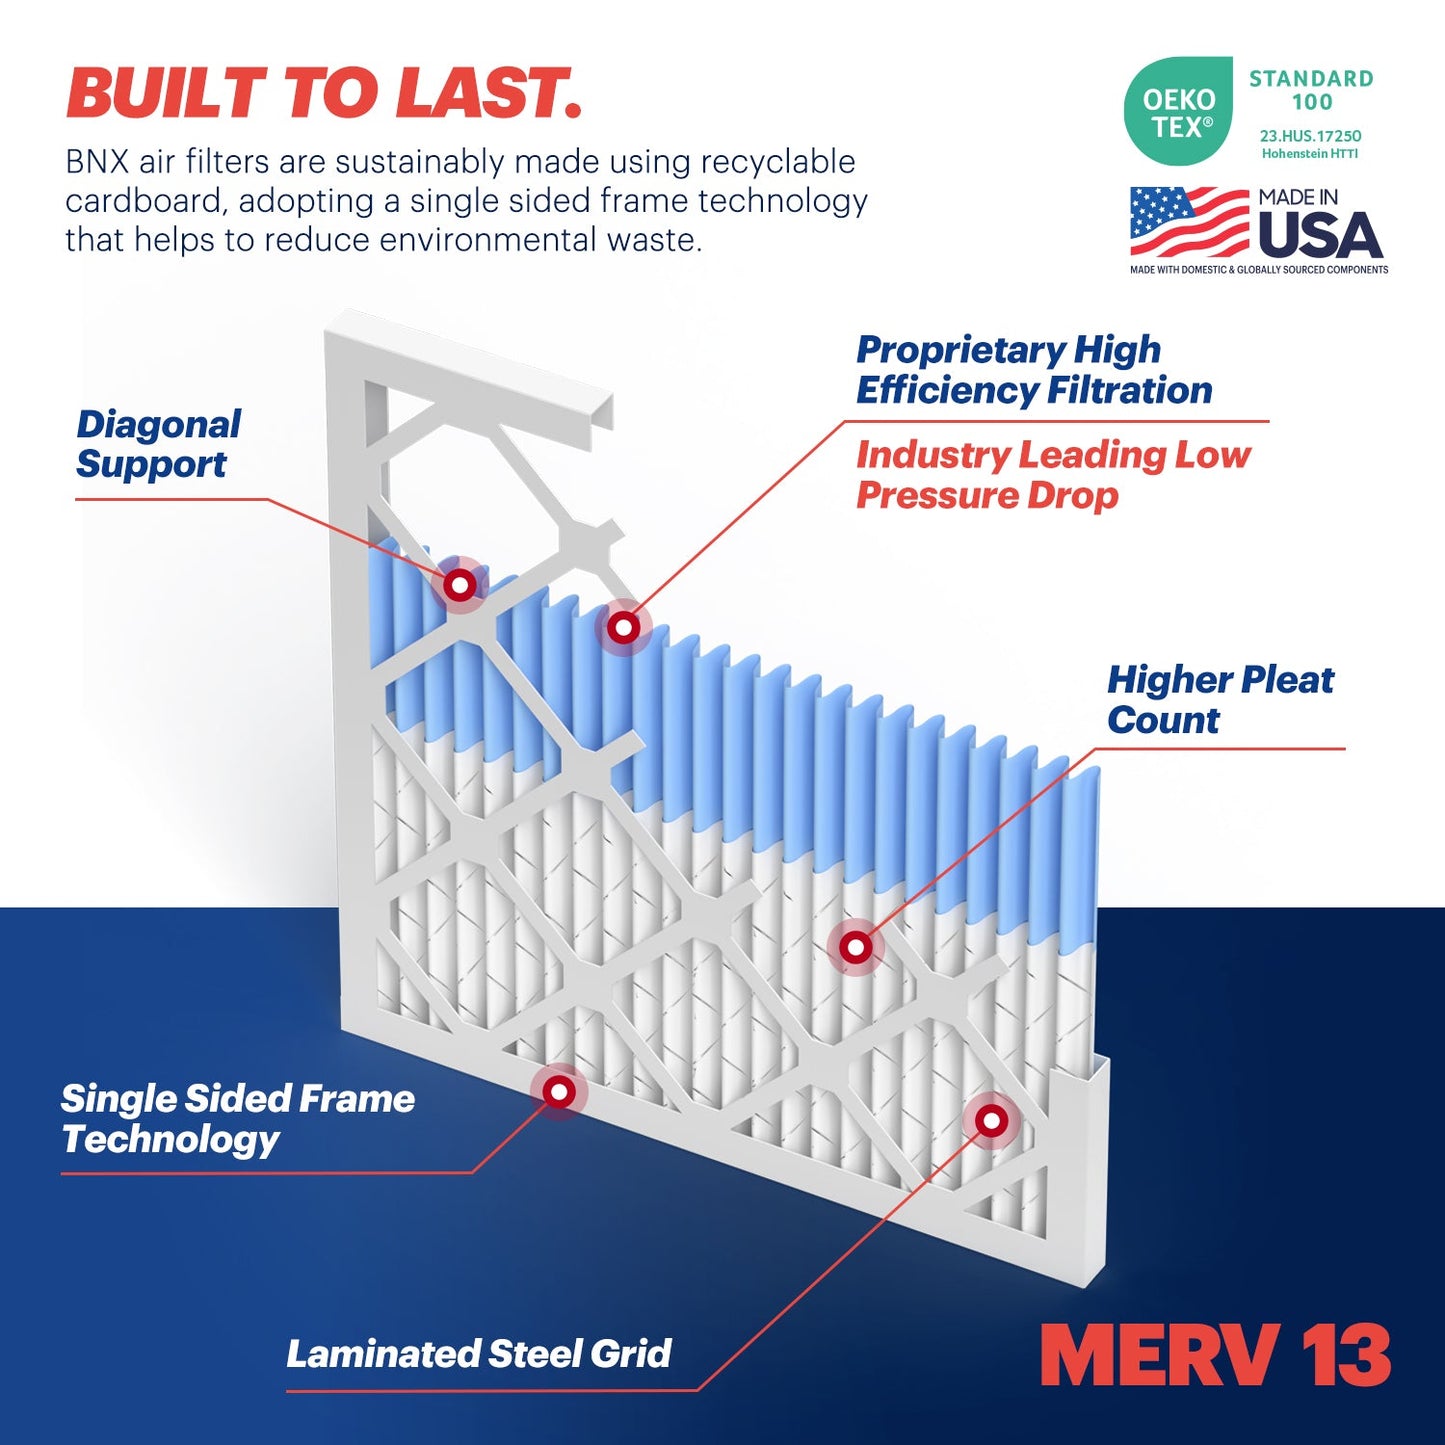 BNX TruFilter 12x20x1 MERV 13 Pleated Air Filter – Made in USA (6-Pack)